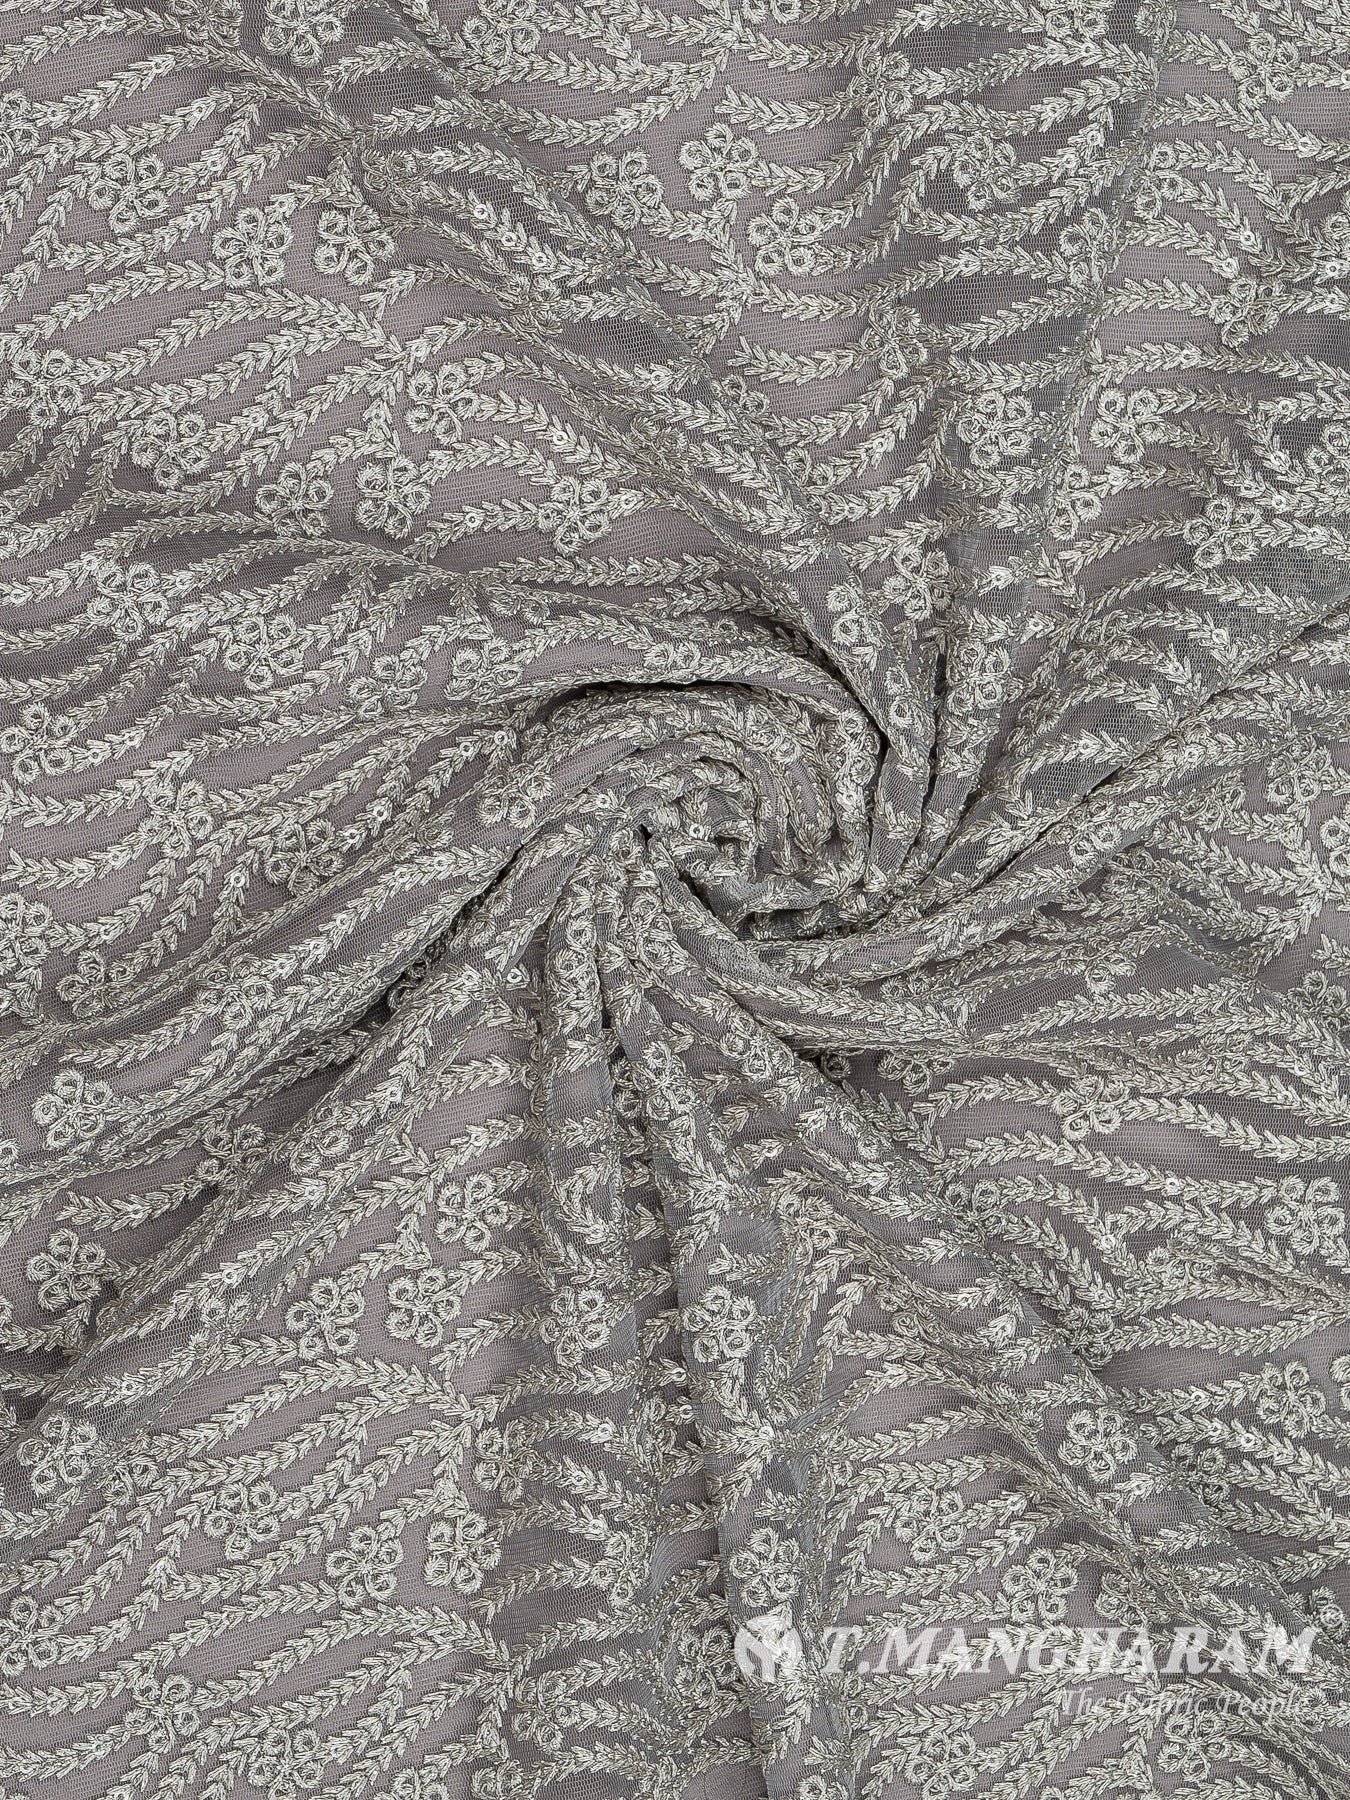 Grey Net Embroidery Fabric - EC8425 view-1